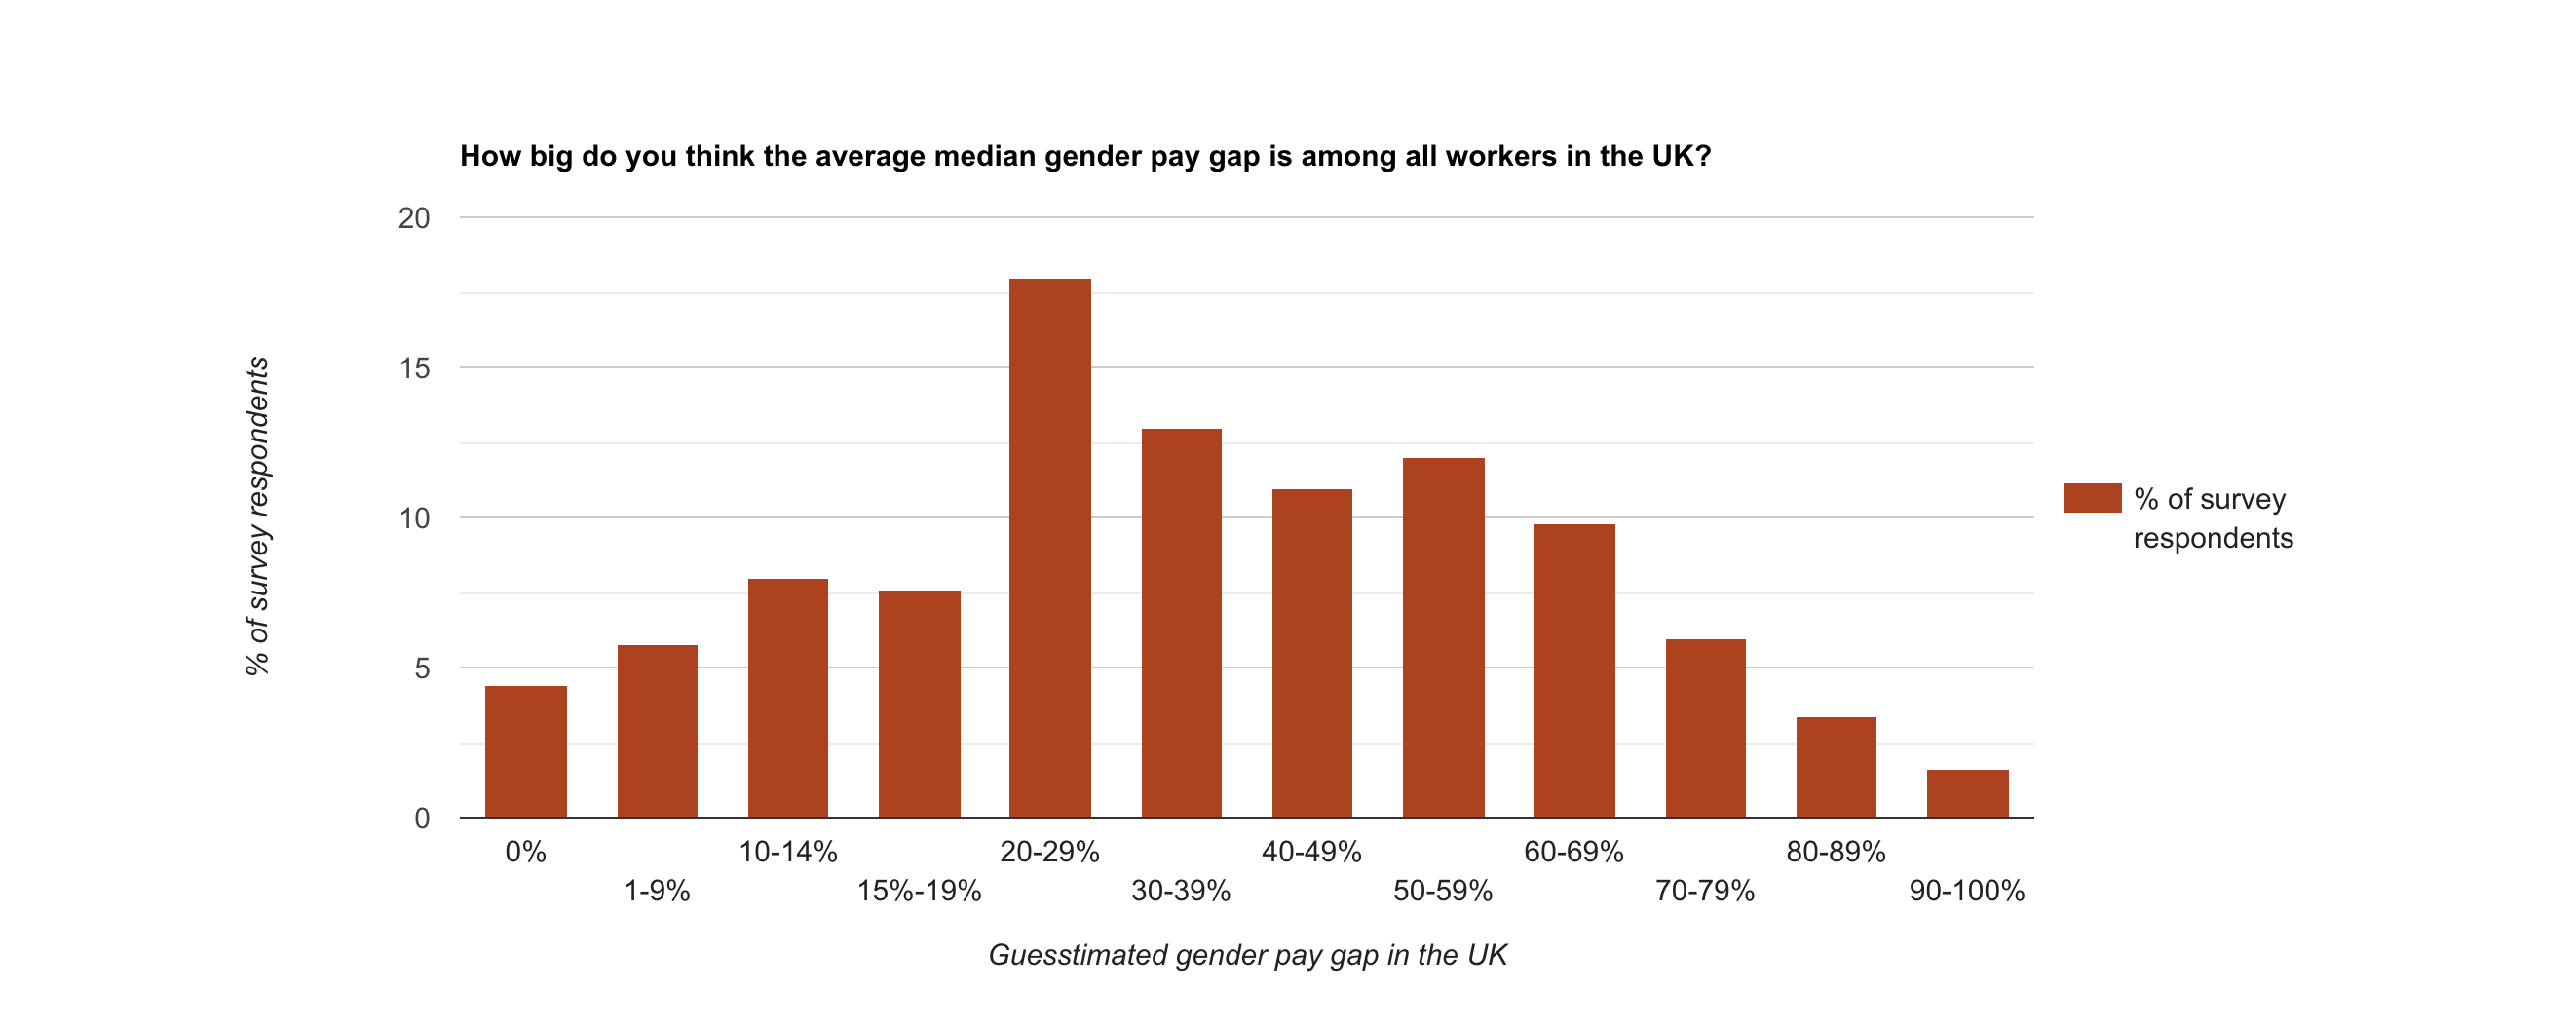 How big do you think the average median gender pay gap is among all workers in the UK